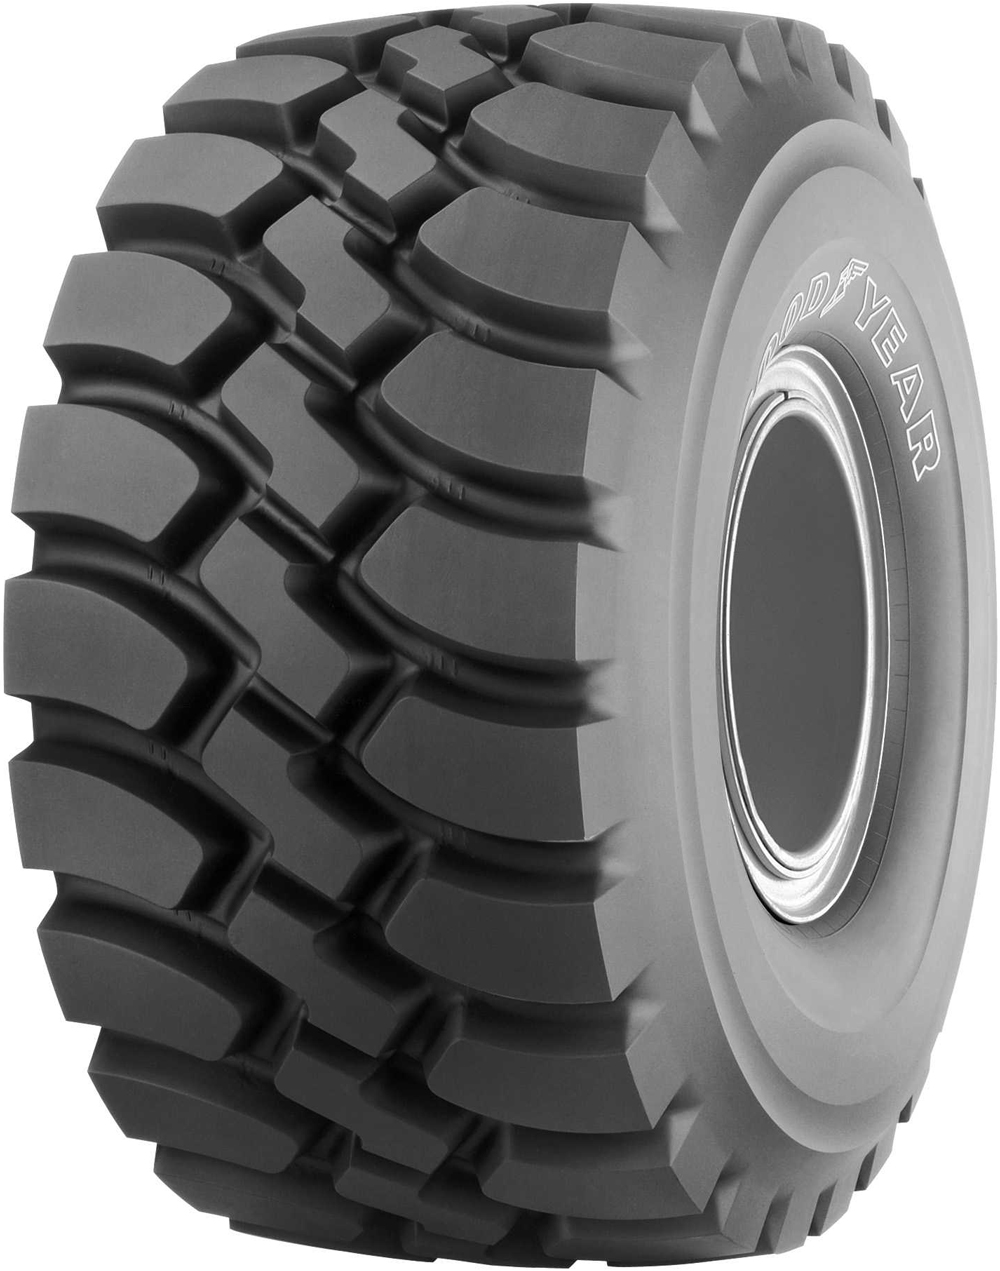 product_type-industrial_tires GOODYEAR GP-3D TL 650/65 R25 199A2